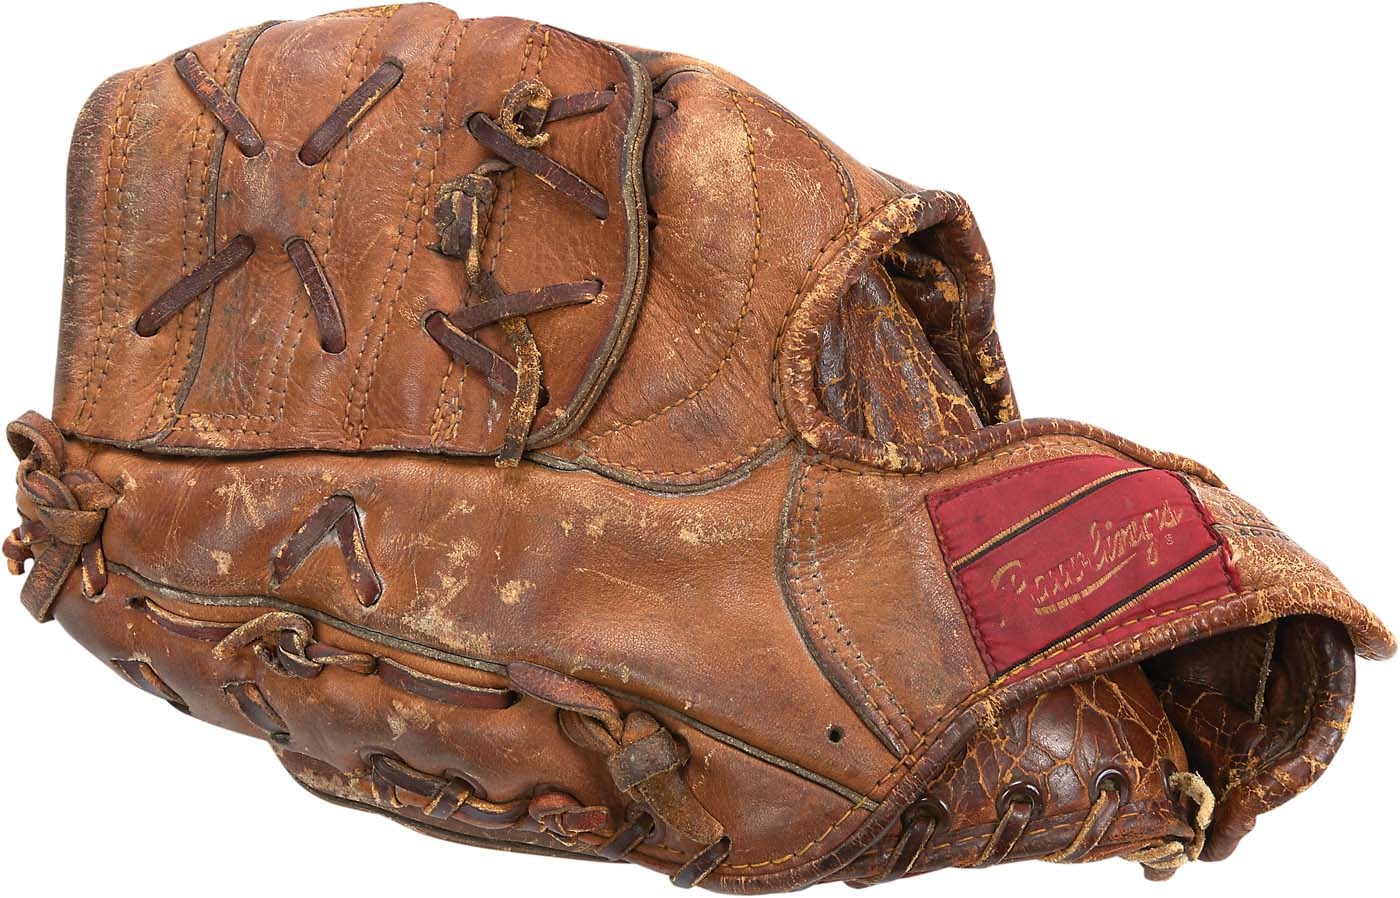 Cleveland Indians - Herb Score Game Used Glove